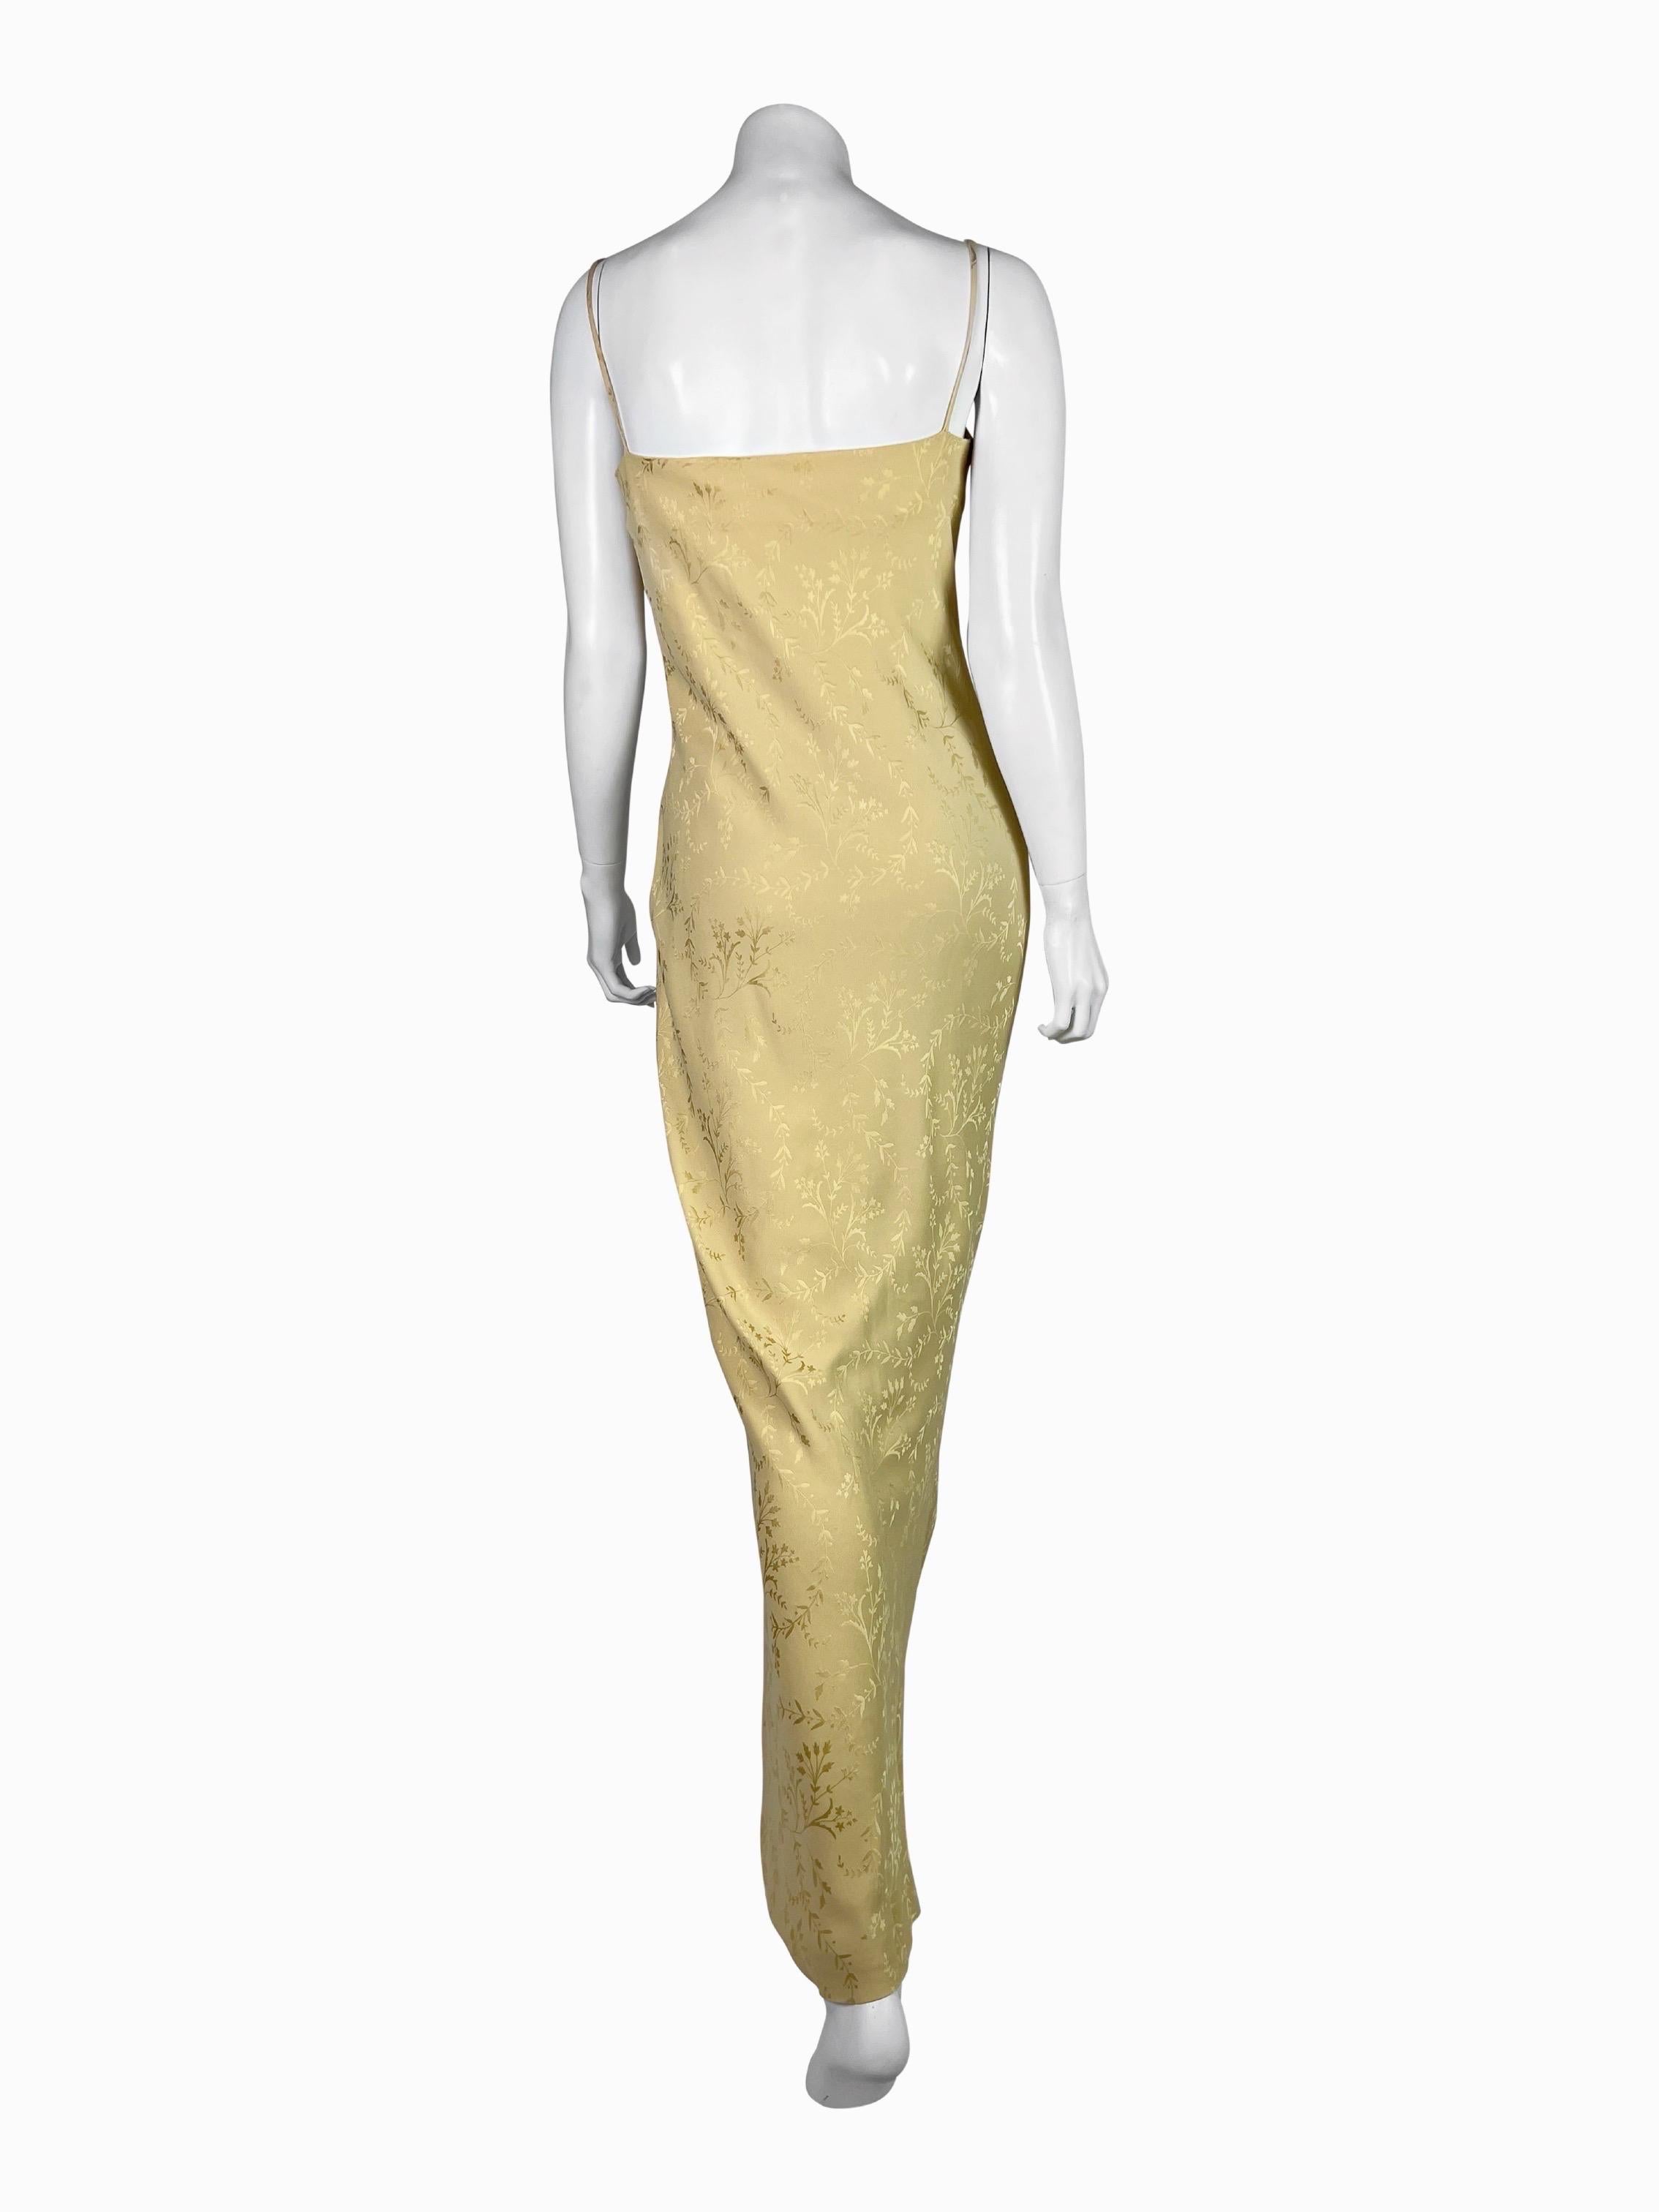 SS 1998 Dior by John Galliano Jacquard Gown In Excellent Condition For Sale In Prague, CZ